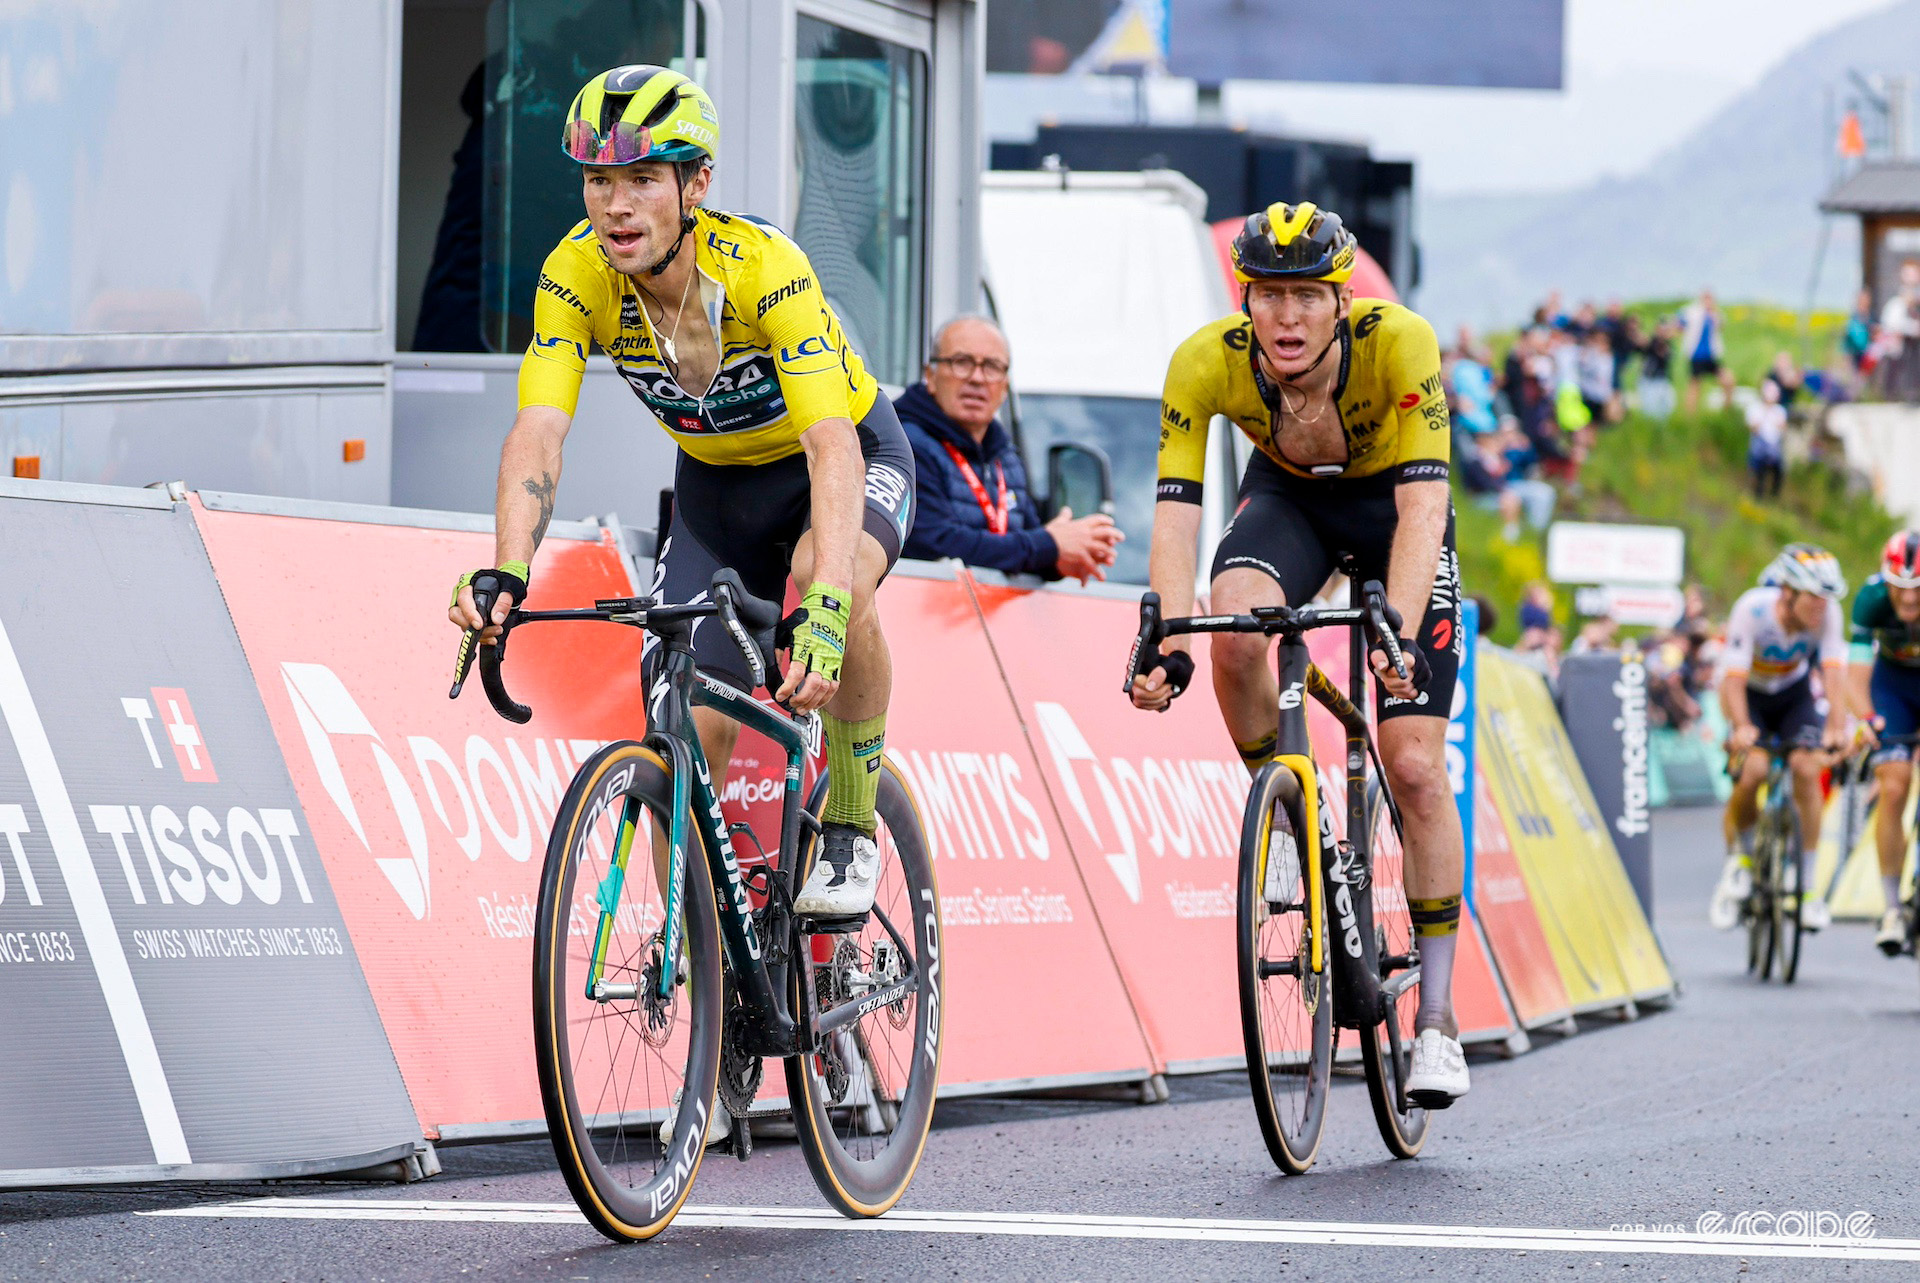 Primož Roglič in the yellow jersey crosses the line victorious on stage 7 of the 2024 Critérium du Dauphiné but unable to celebrate with Matteo Jorgenson glued to his wheel.